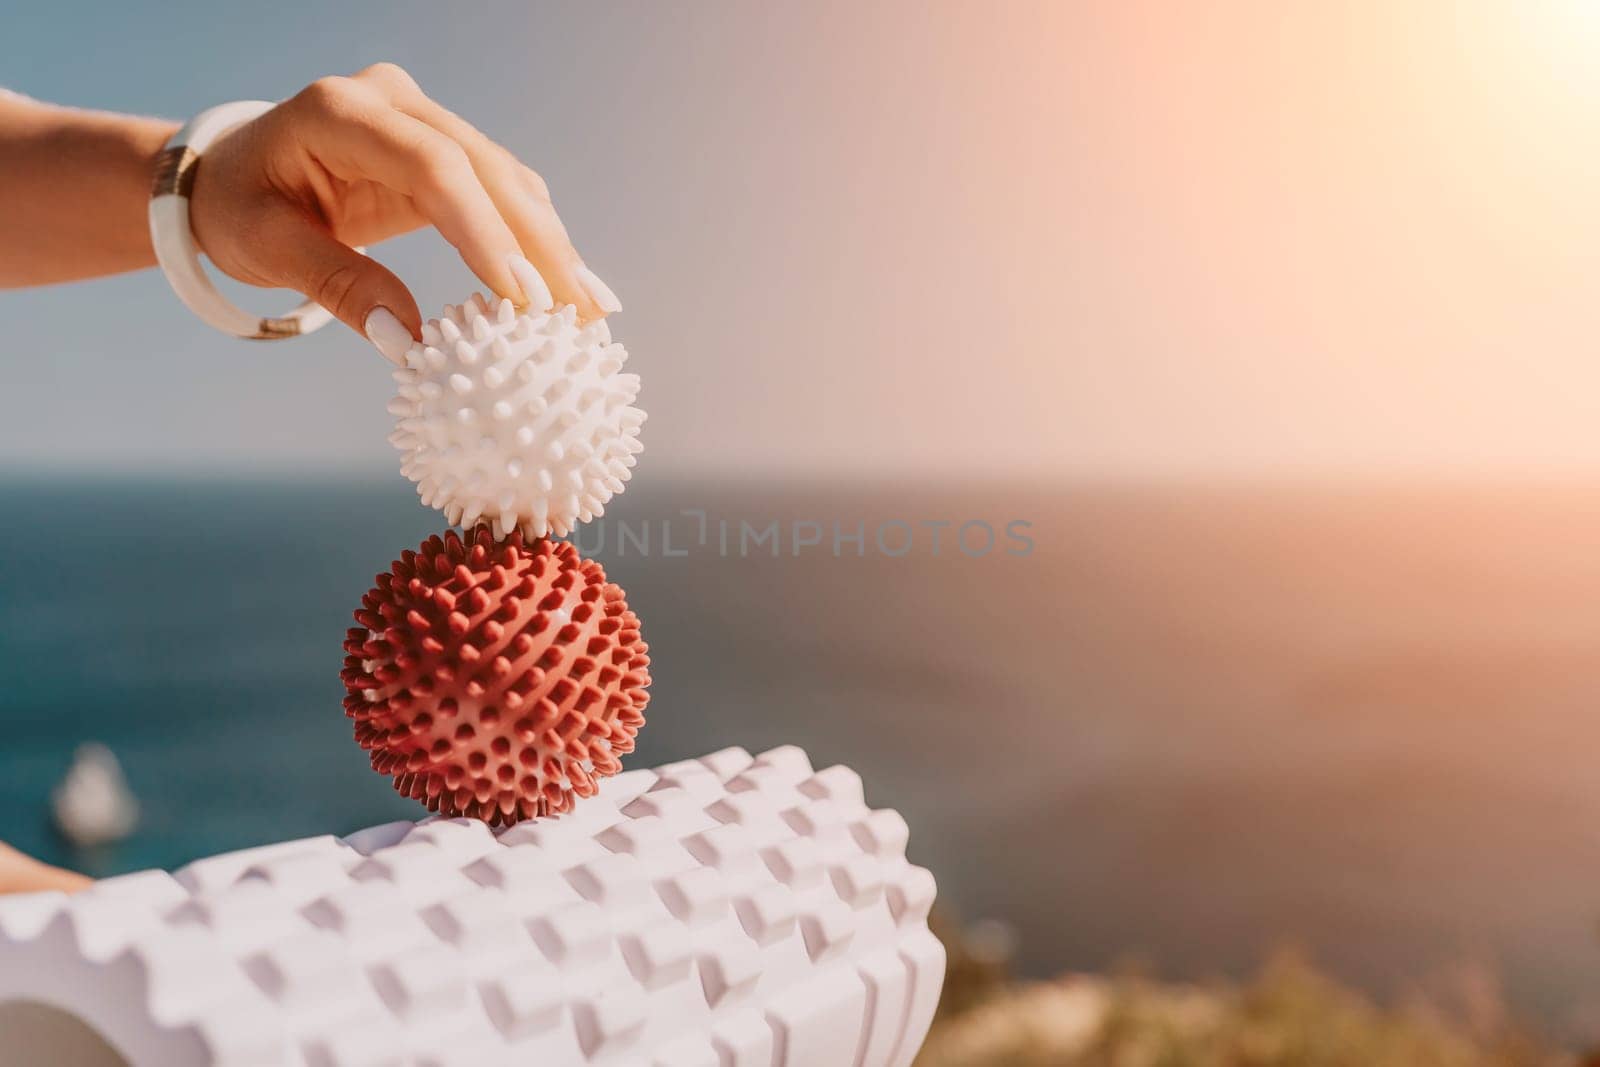 Woman sea pilates. Sporty happy middle aged woman practicing fitness on yoga mat with massage balls and roller near sea, smiling active female outside, enjoying healthy lifestyle, harmony by panophotograph